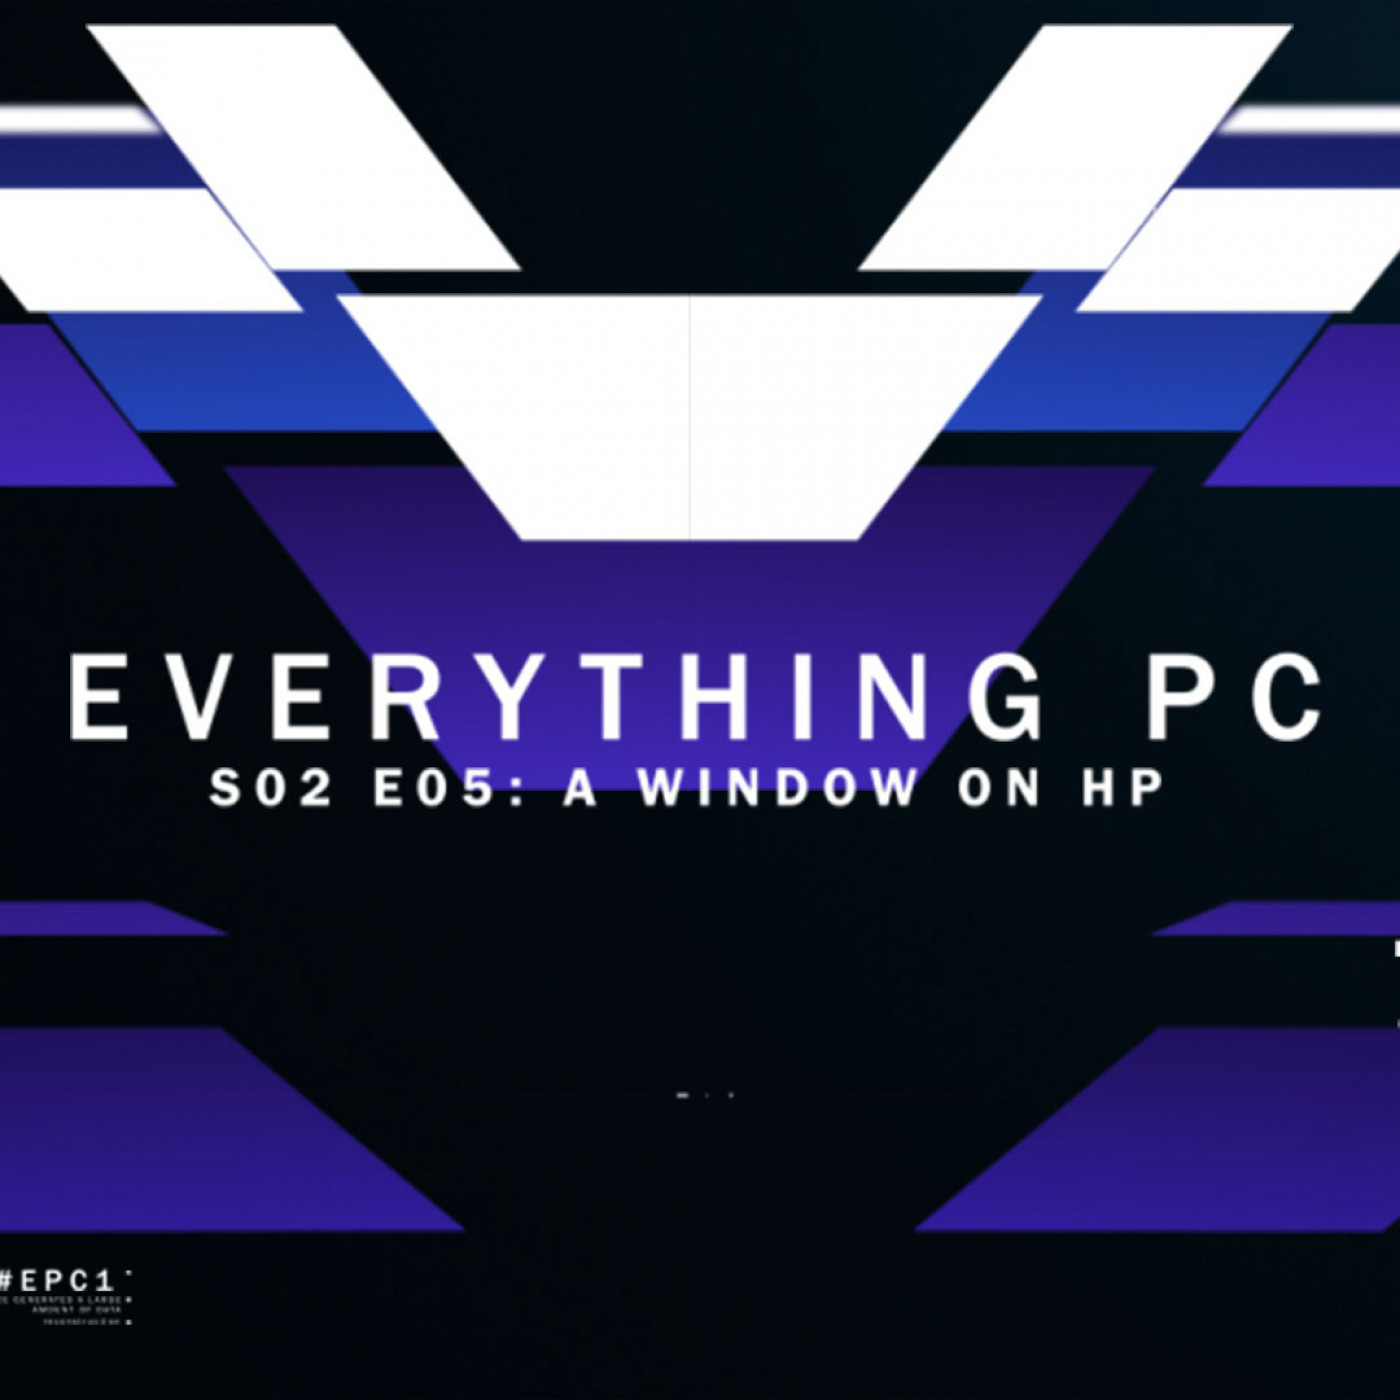 Everything PC S02E05 - 'A window on HP'